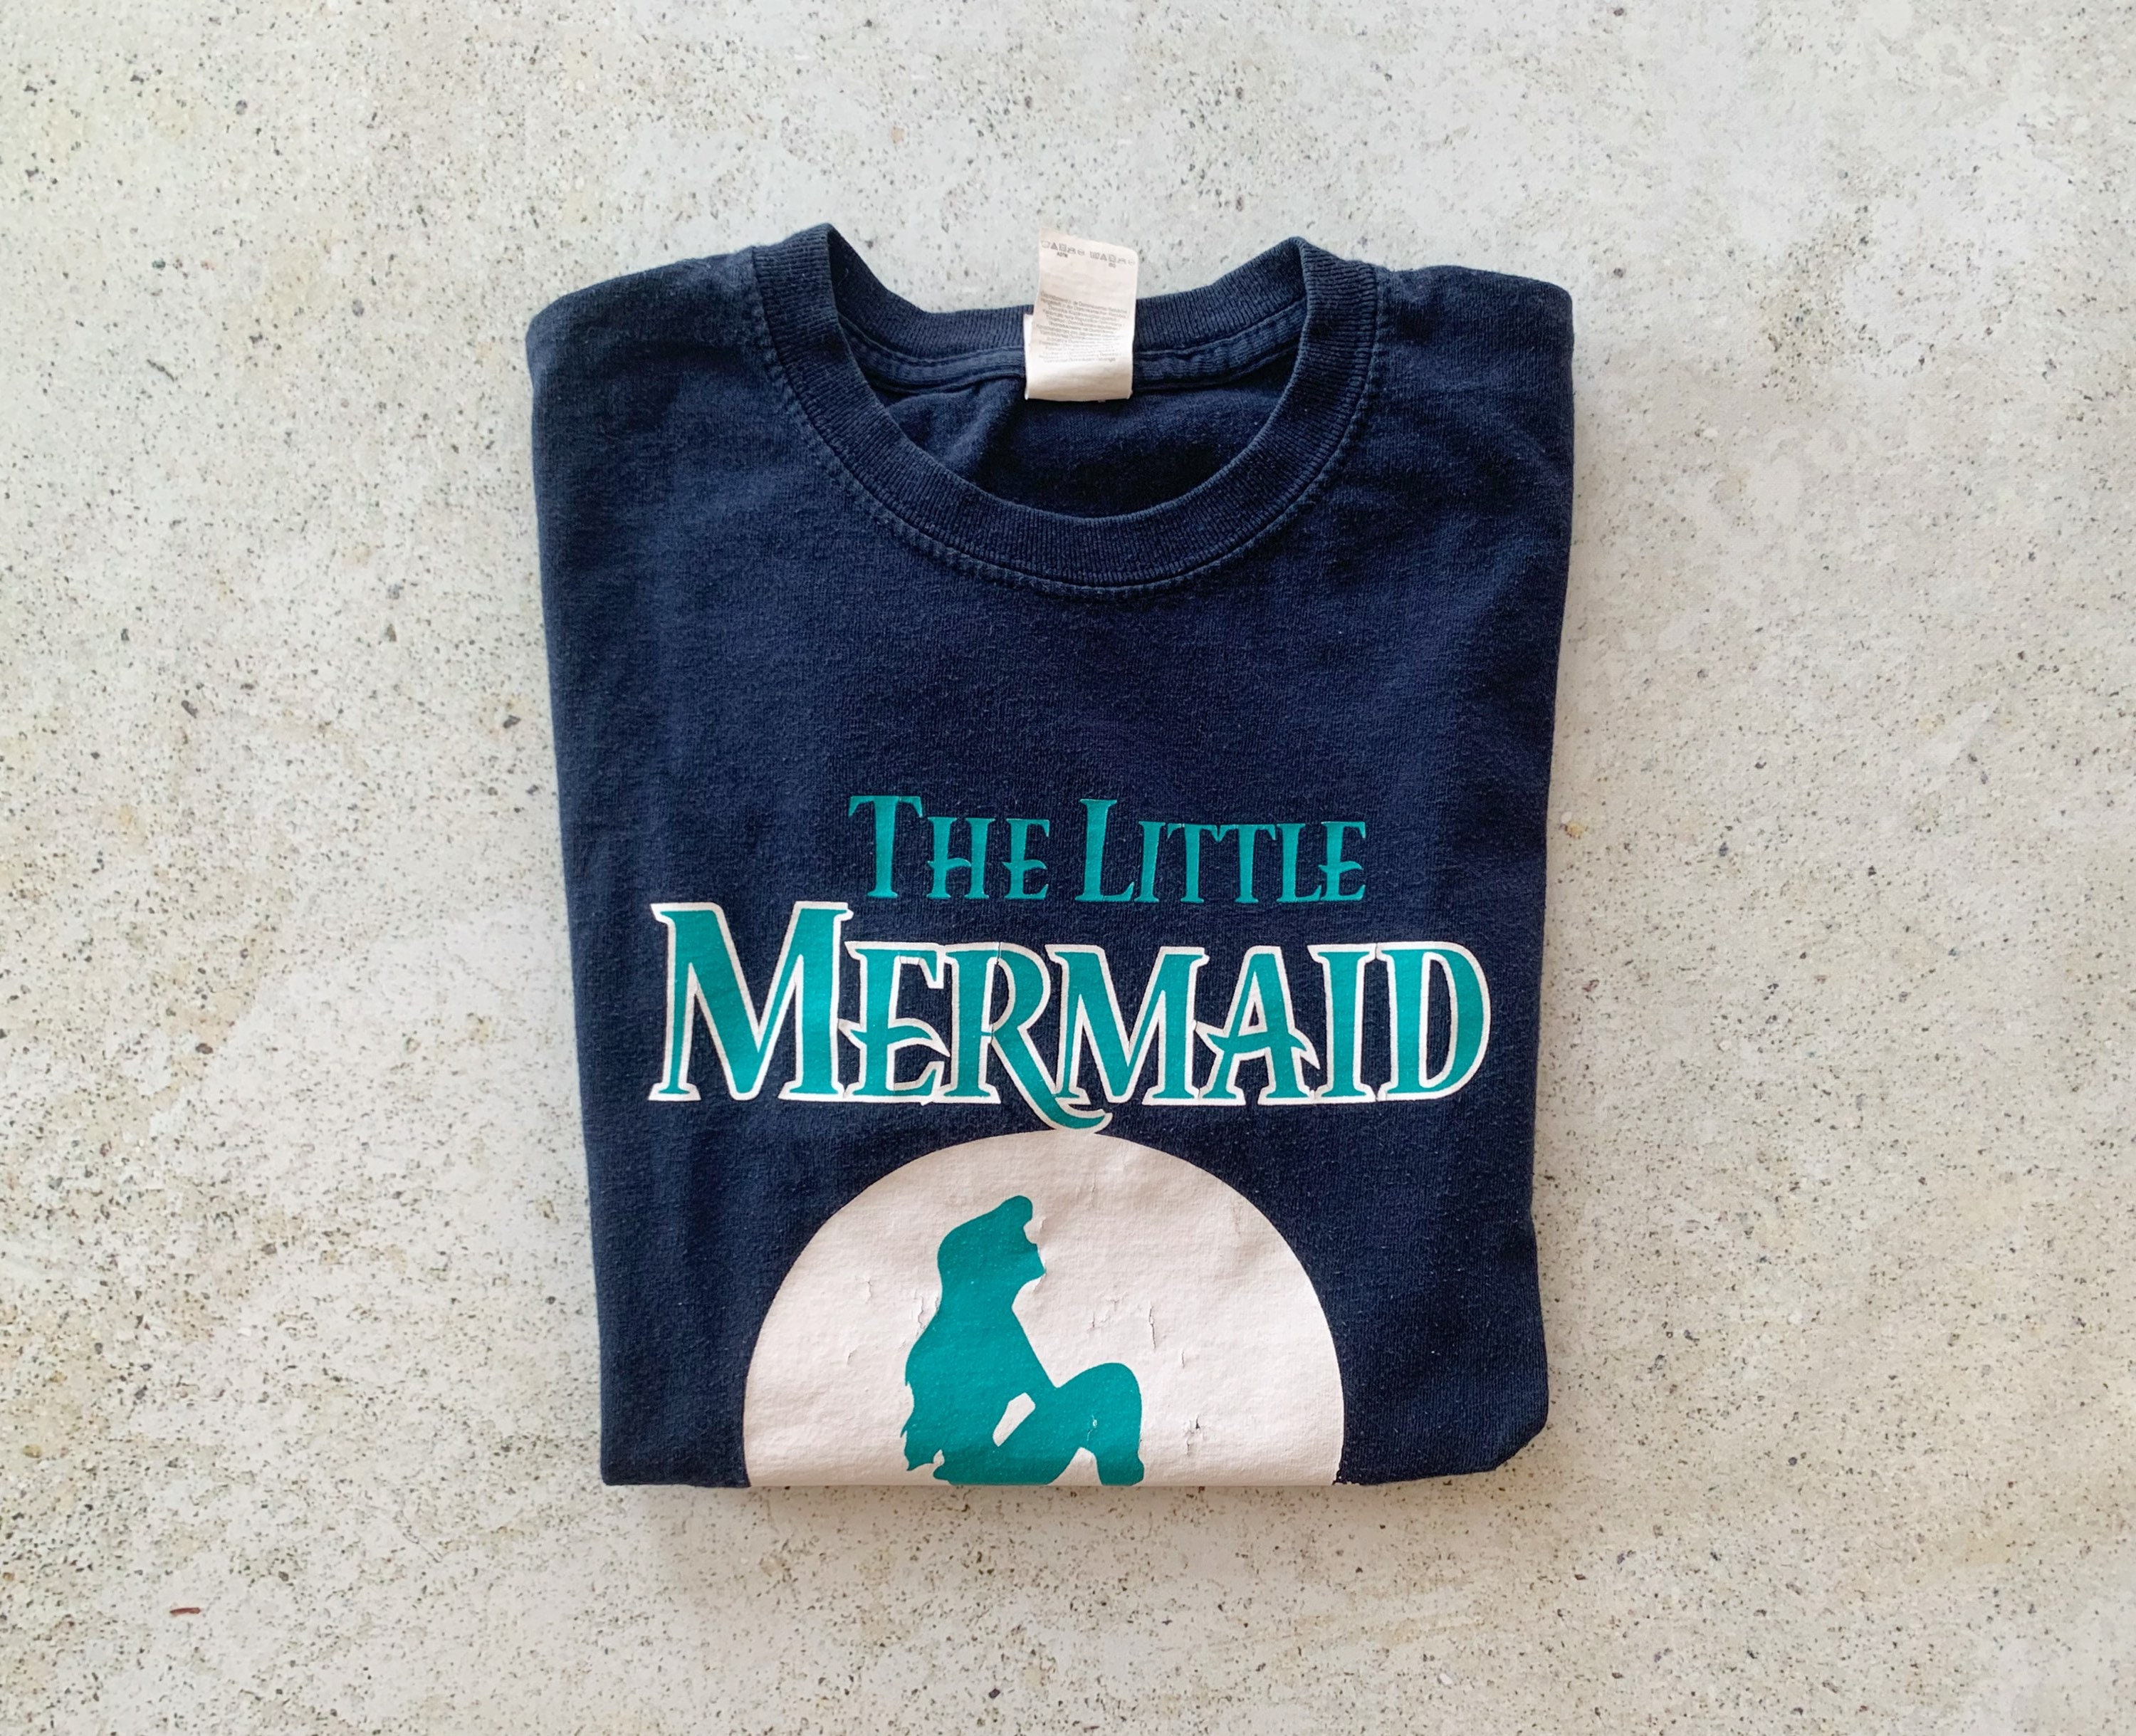 Vintage 1990s Girls The Little Mermaid Tshirt Disney Character Fashions All Over Print Single Stitch Youth Size Small Made in USA Kleding Meisjeskleding Tops & T-shirts T-shirts T-shirts met print 